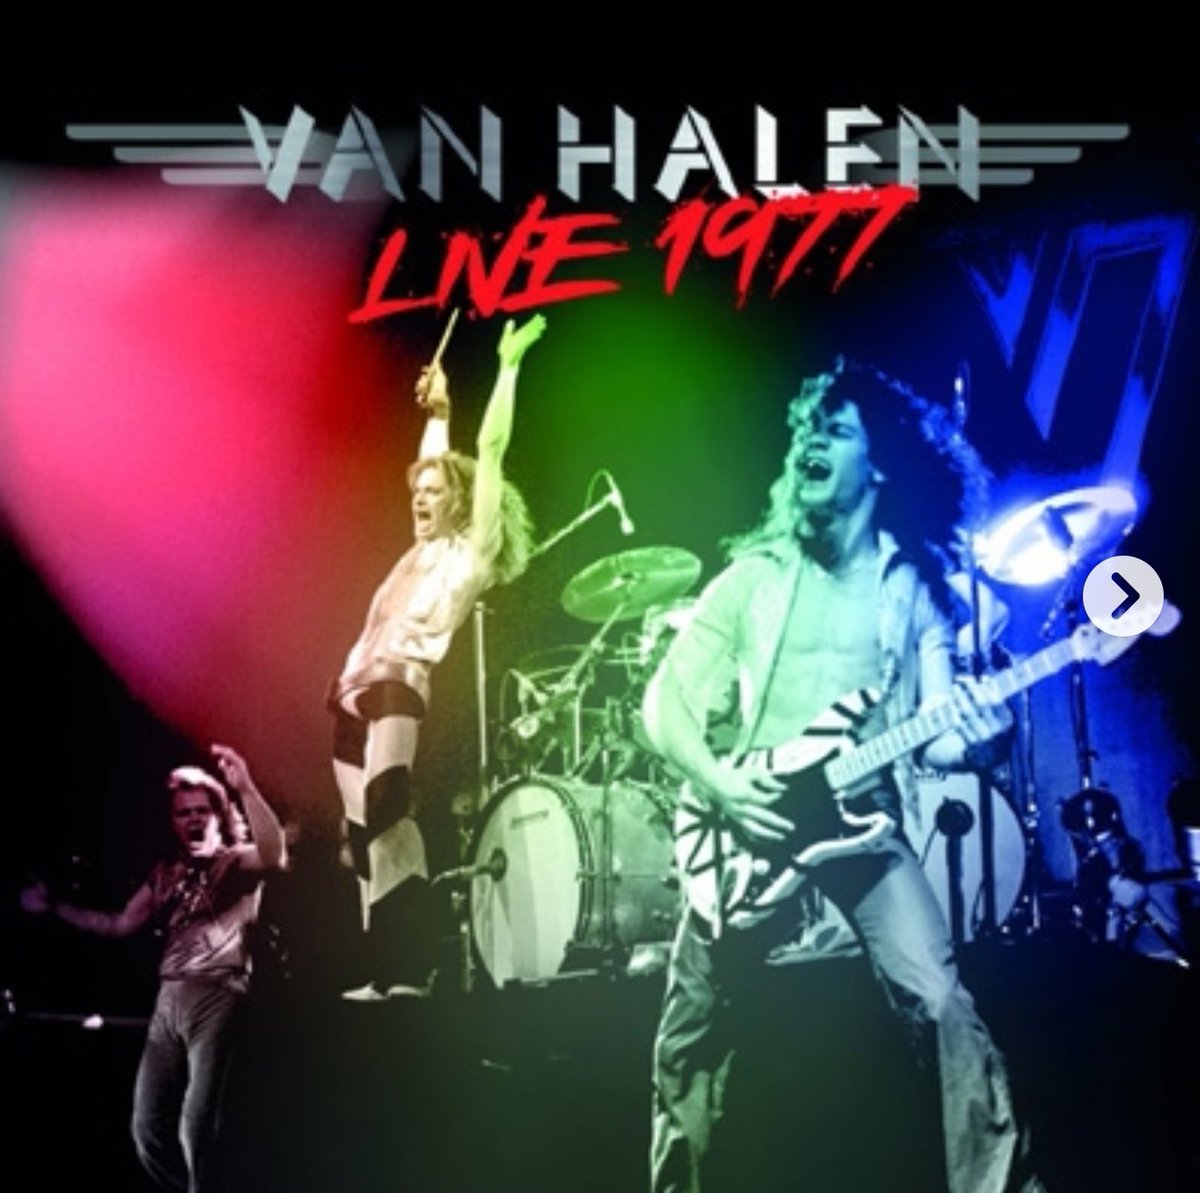 Live 1977 (Limited Edition, Red Vinyl) [Import]